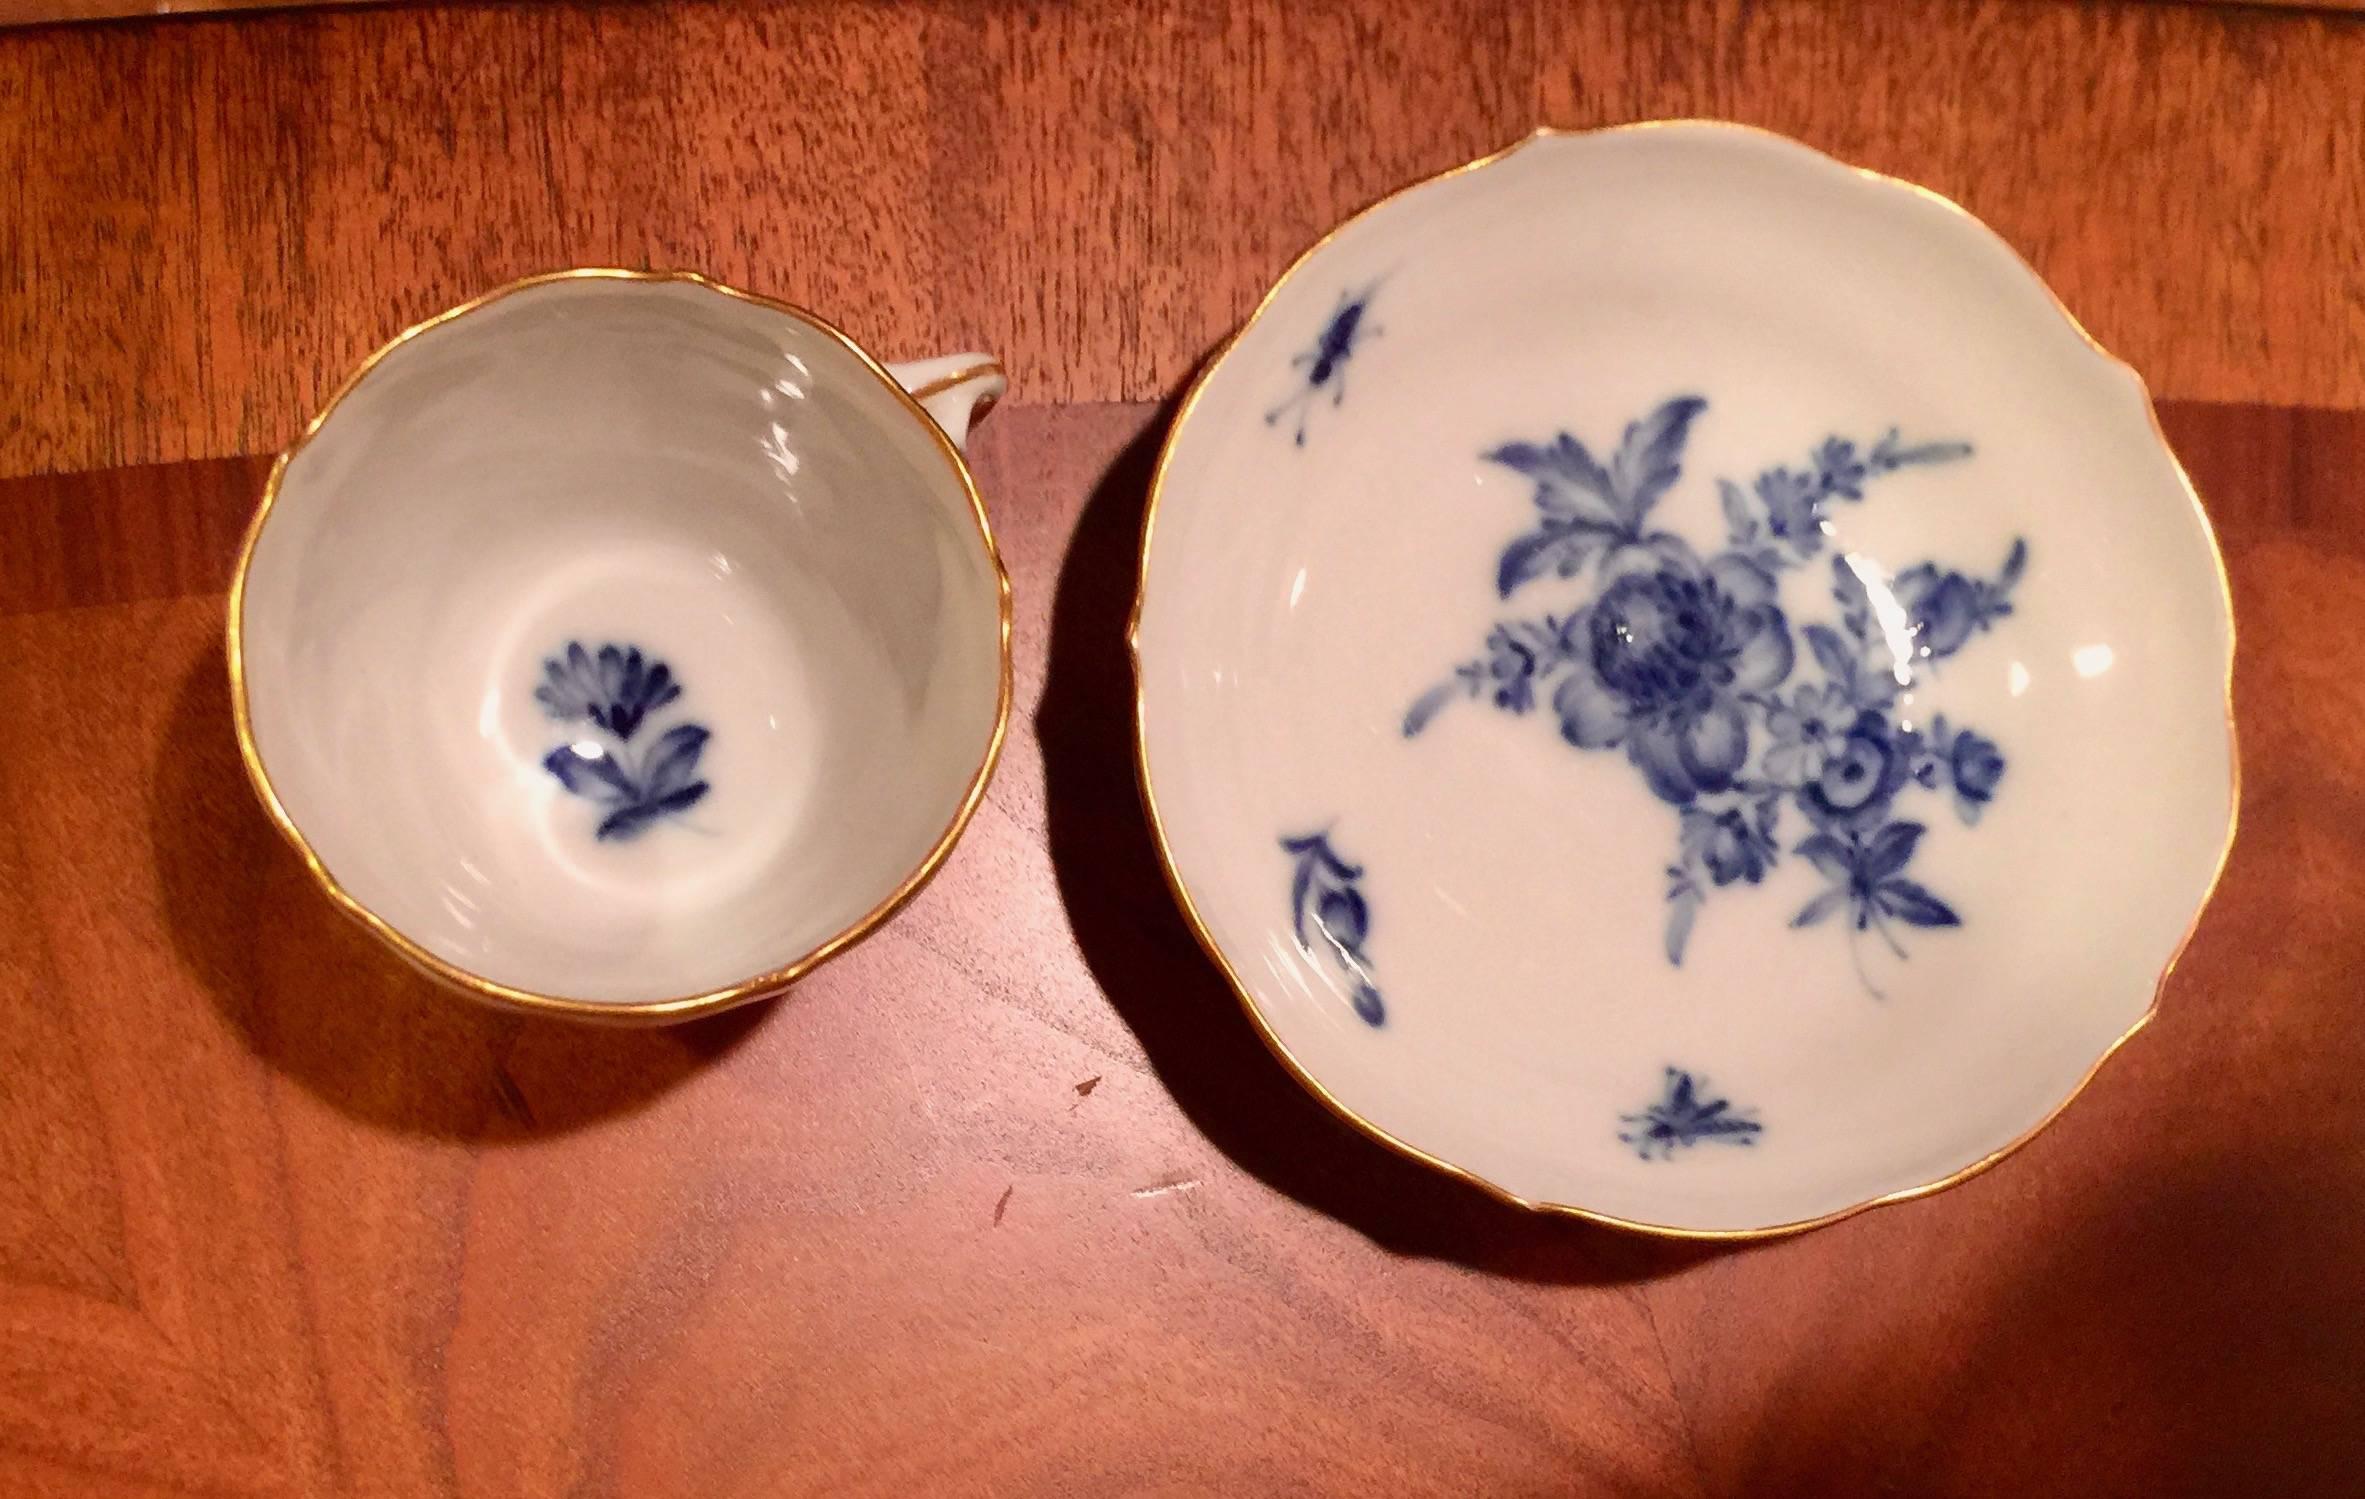 19th century German Meissen Porcelain cup and saucer
White with gold rim and blue flowers
Saucer 4.5 inches diameter
Cup 2.25" diameter 2" height.